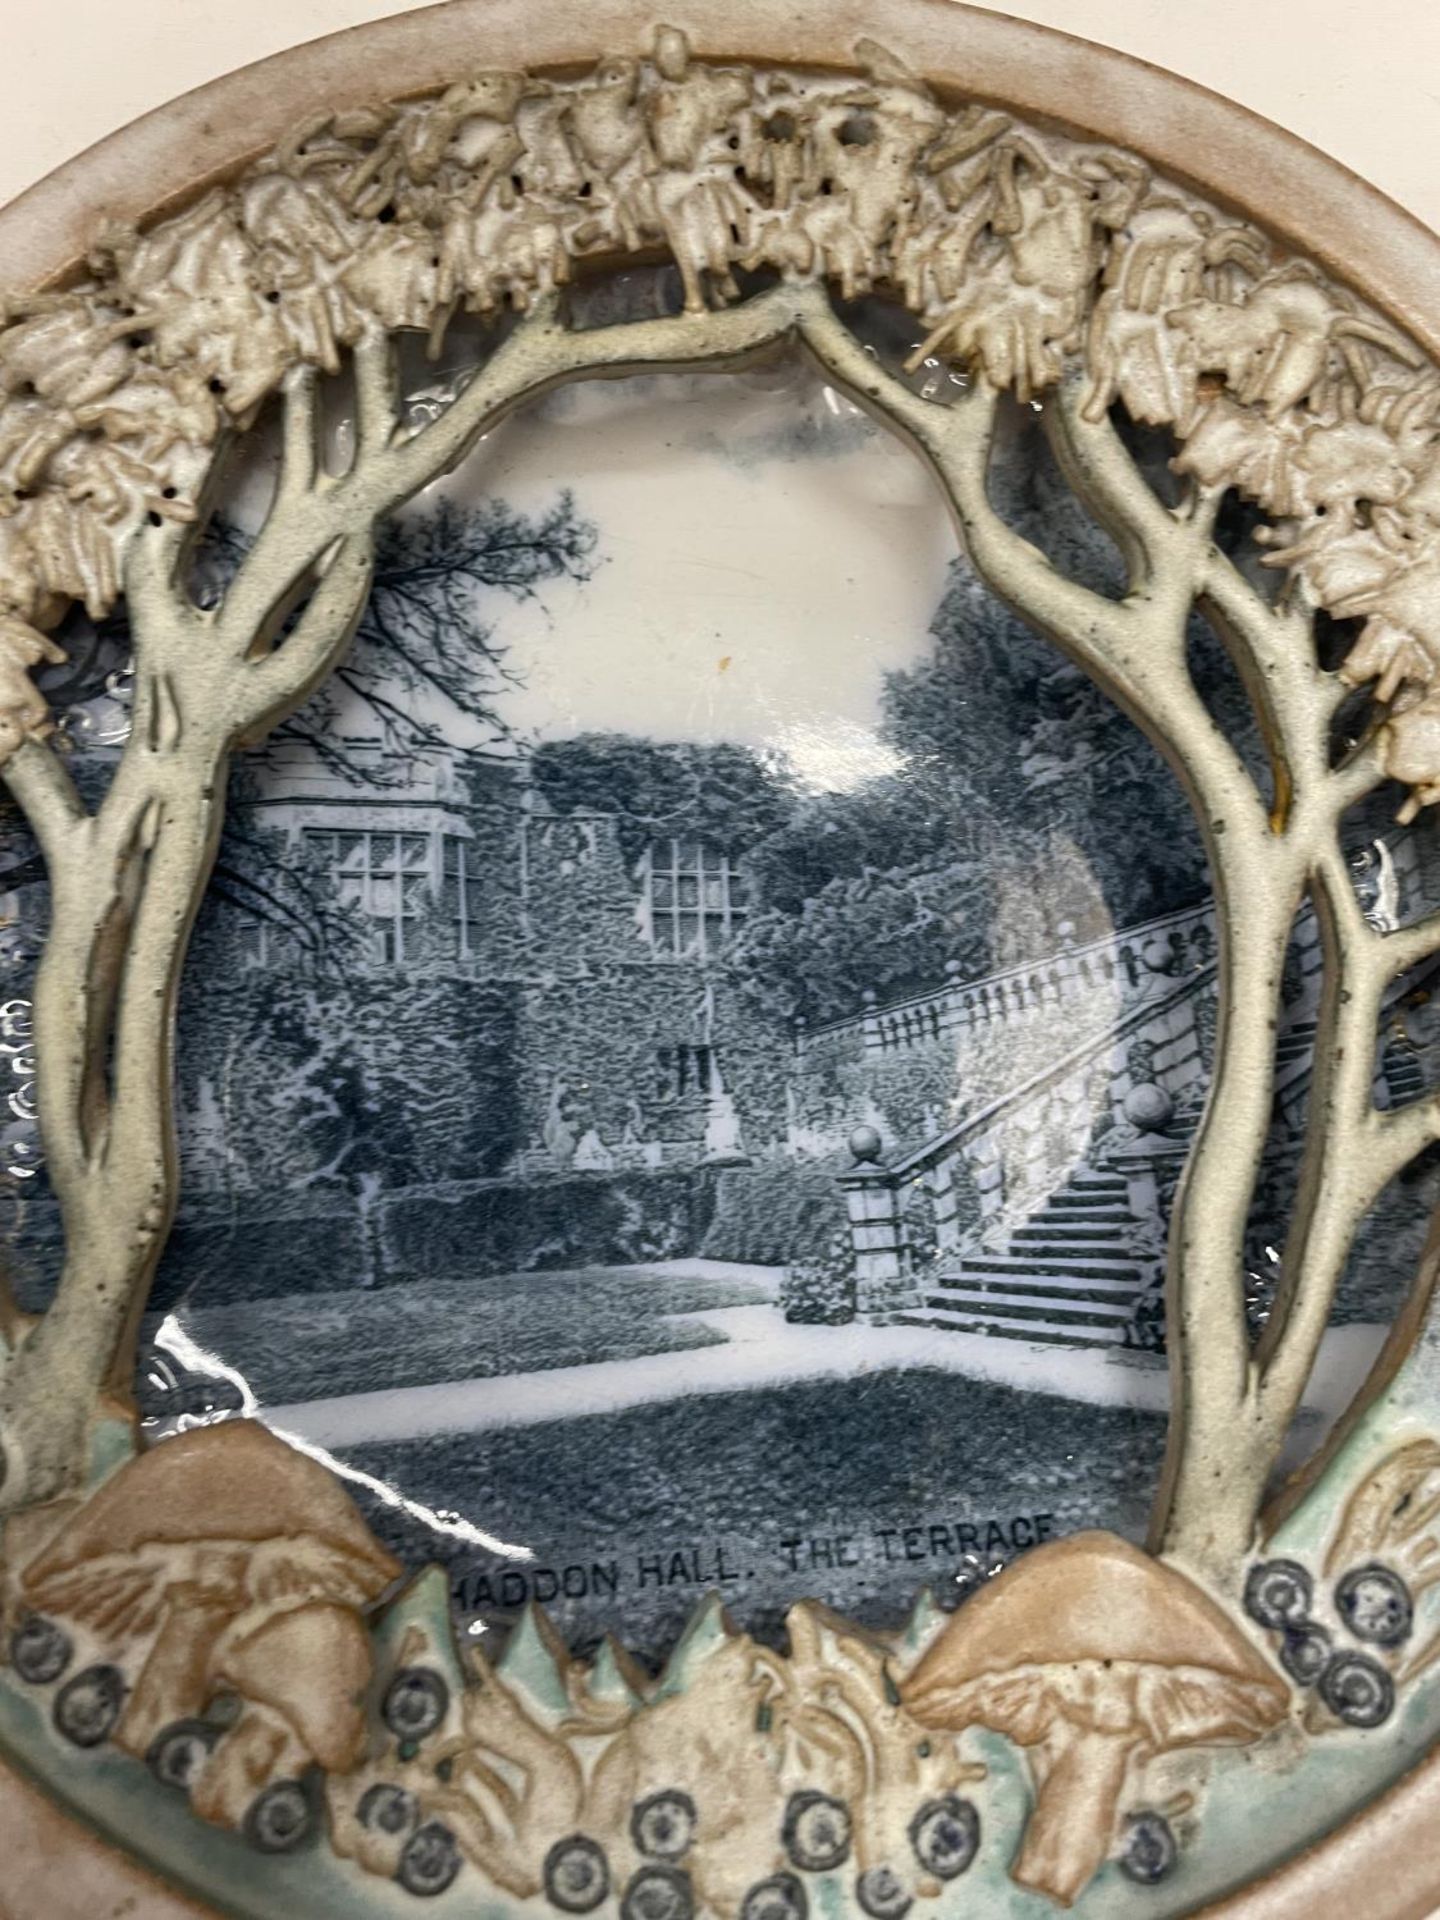 A HADDON HALL WALL PLAQUE WITH A 3D EFFECT SCENE DIAMETER 28CM - Image 4 of 9